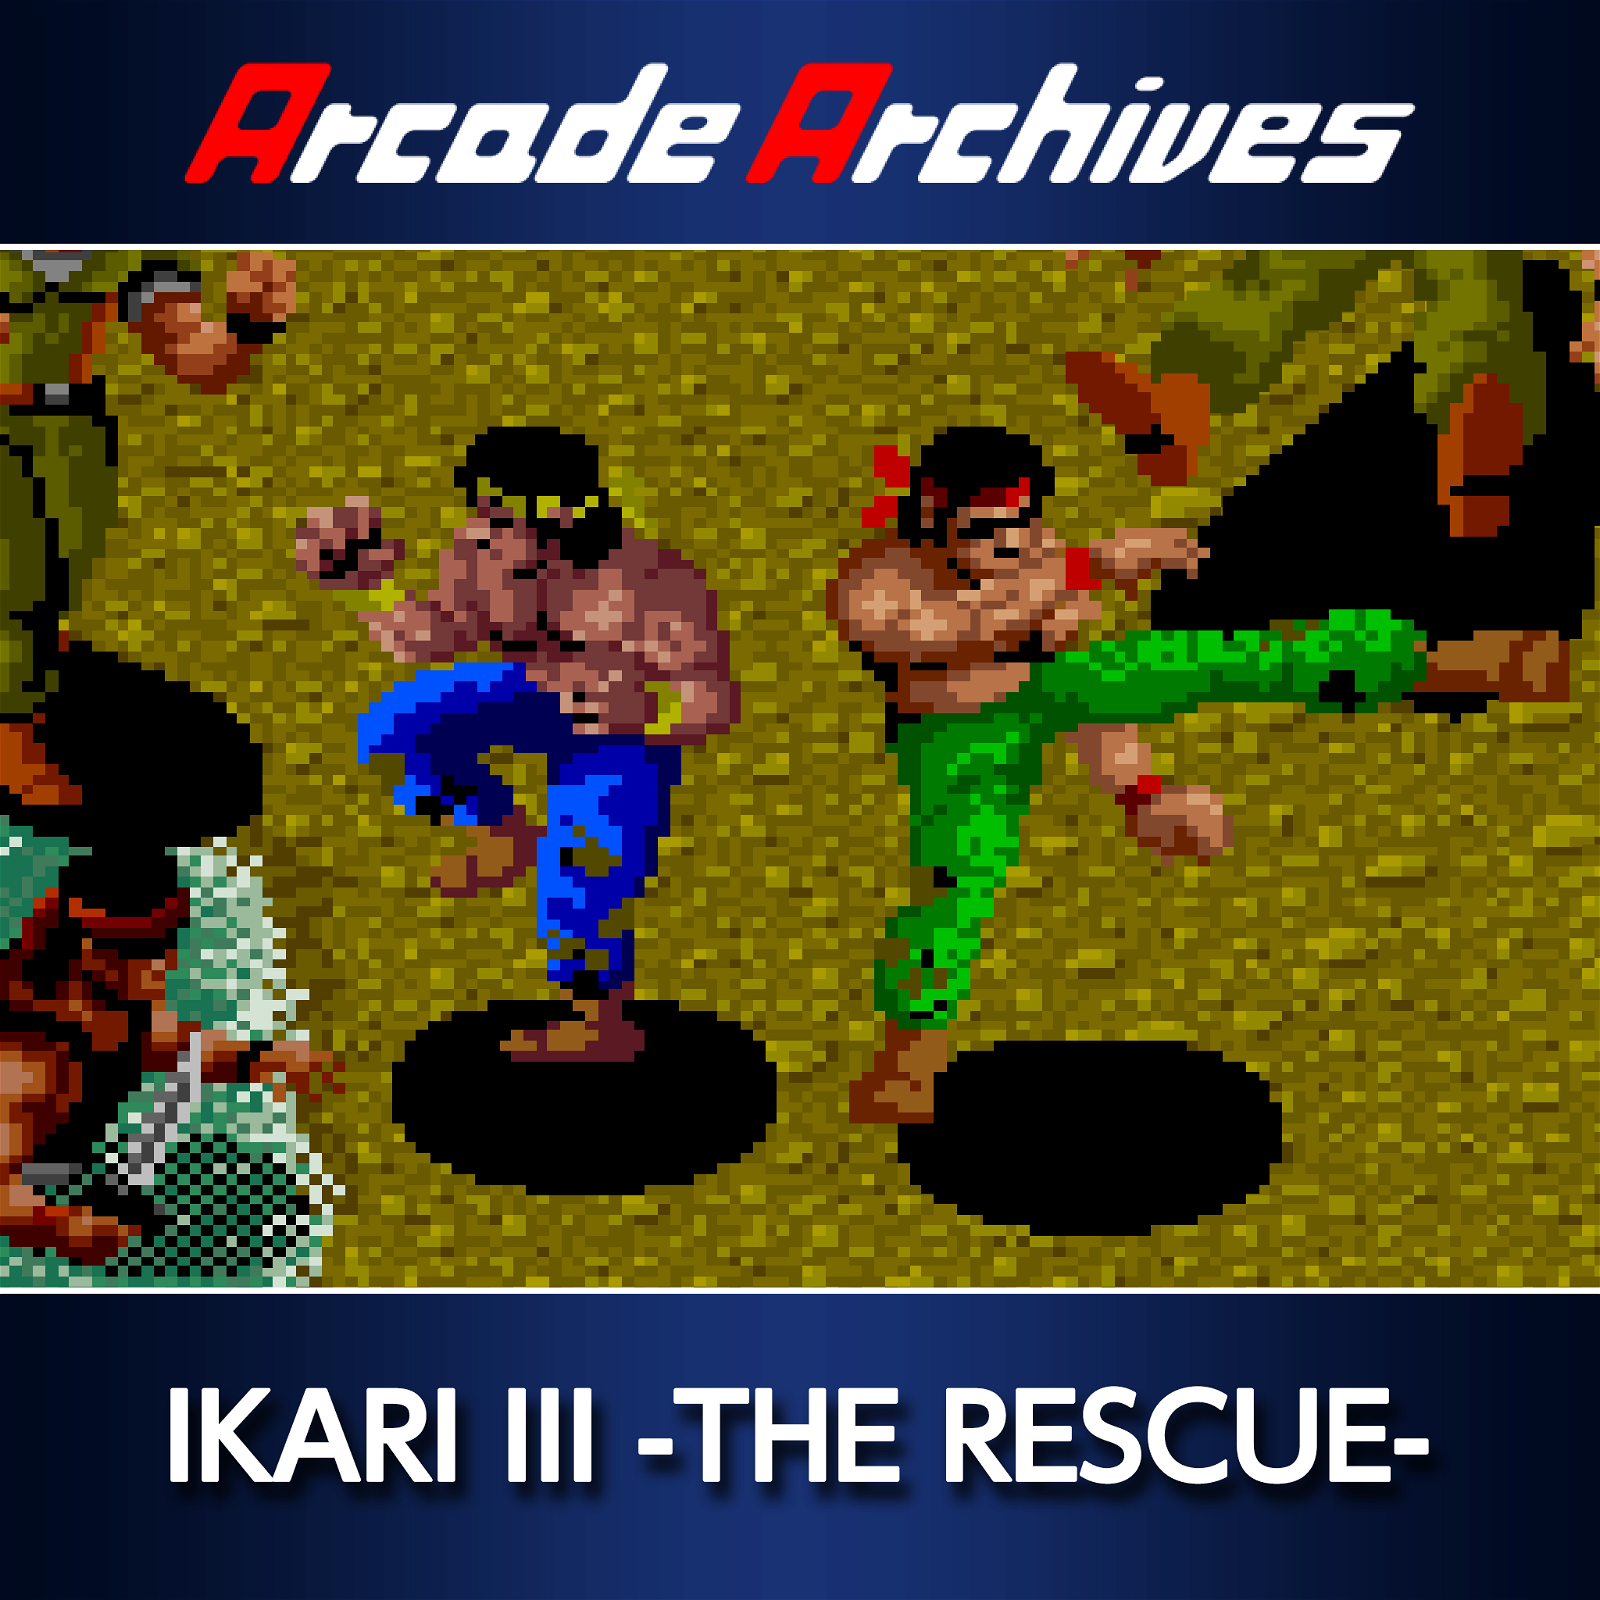 Image of Arcade Archives IKARI III THE RESCUE-